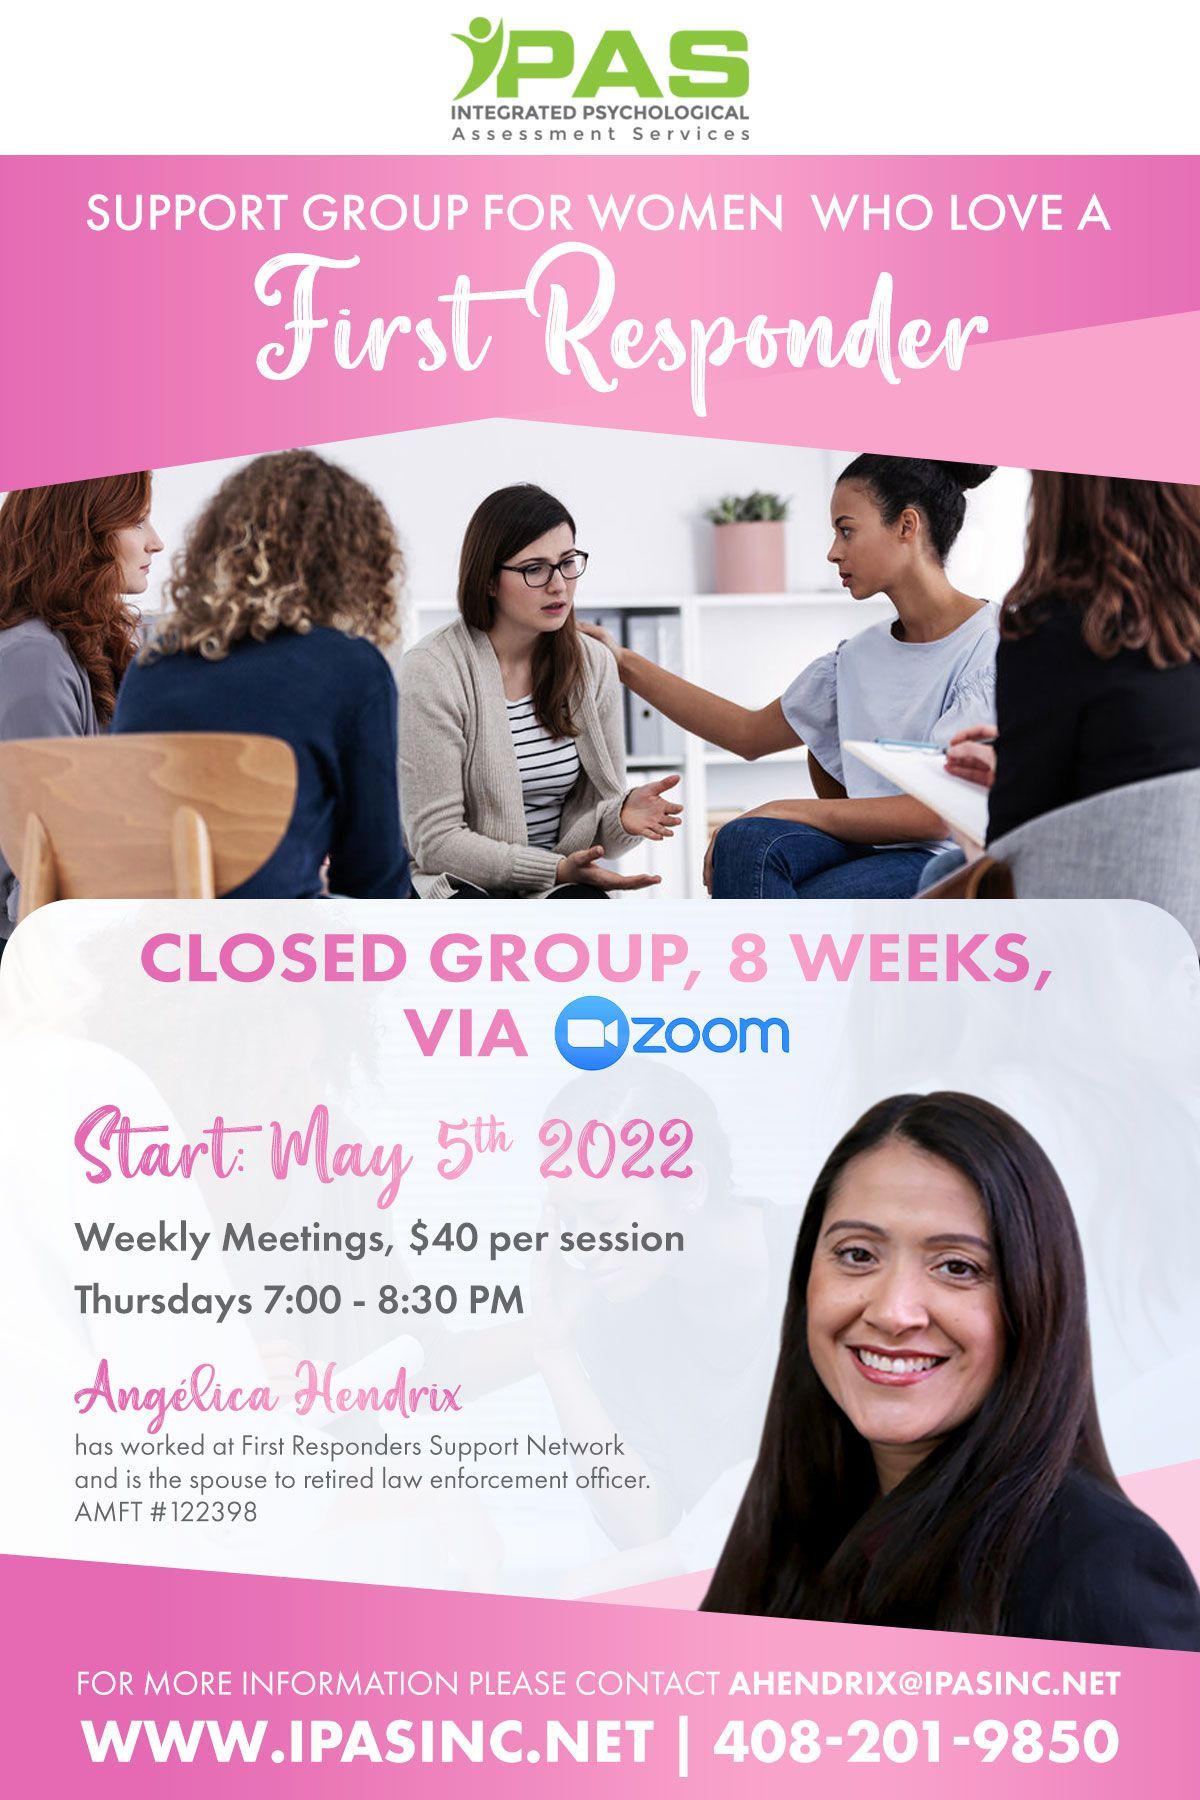 Gallery Photo of Support Group for women who love a First Responder